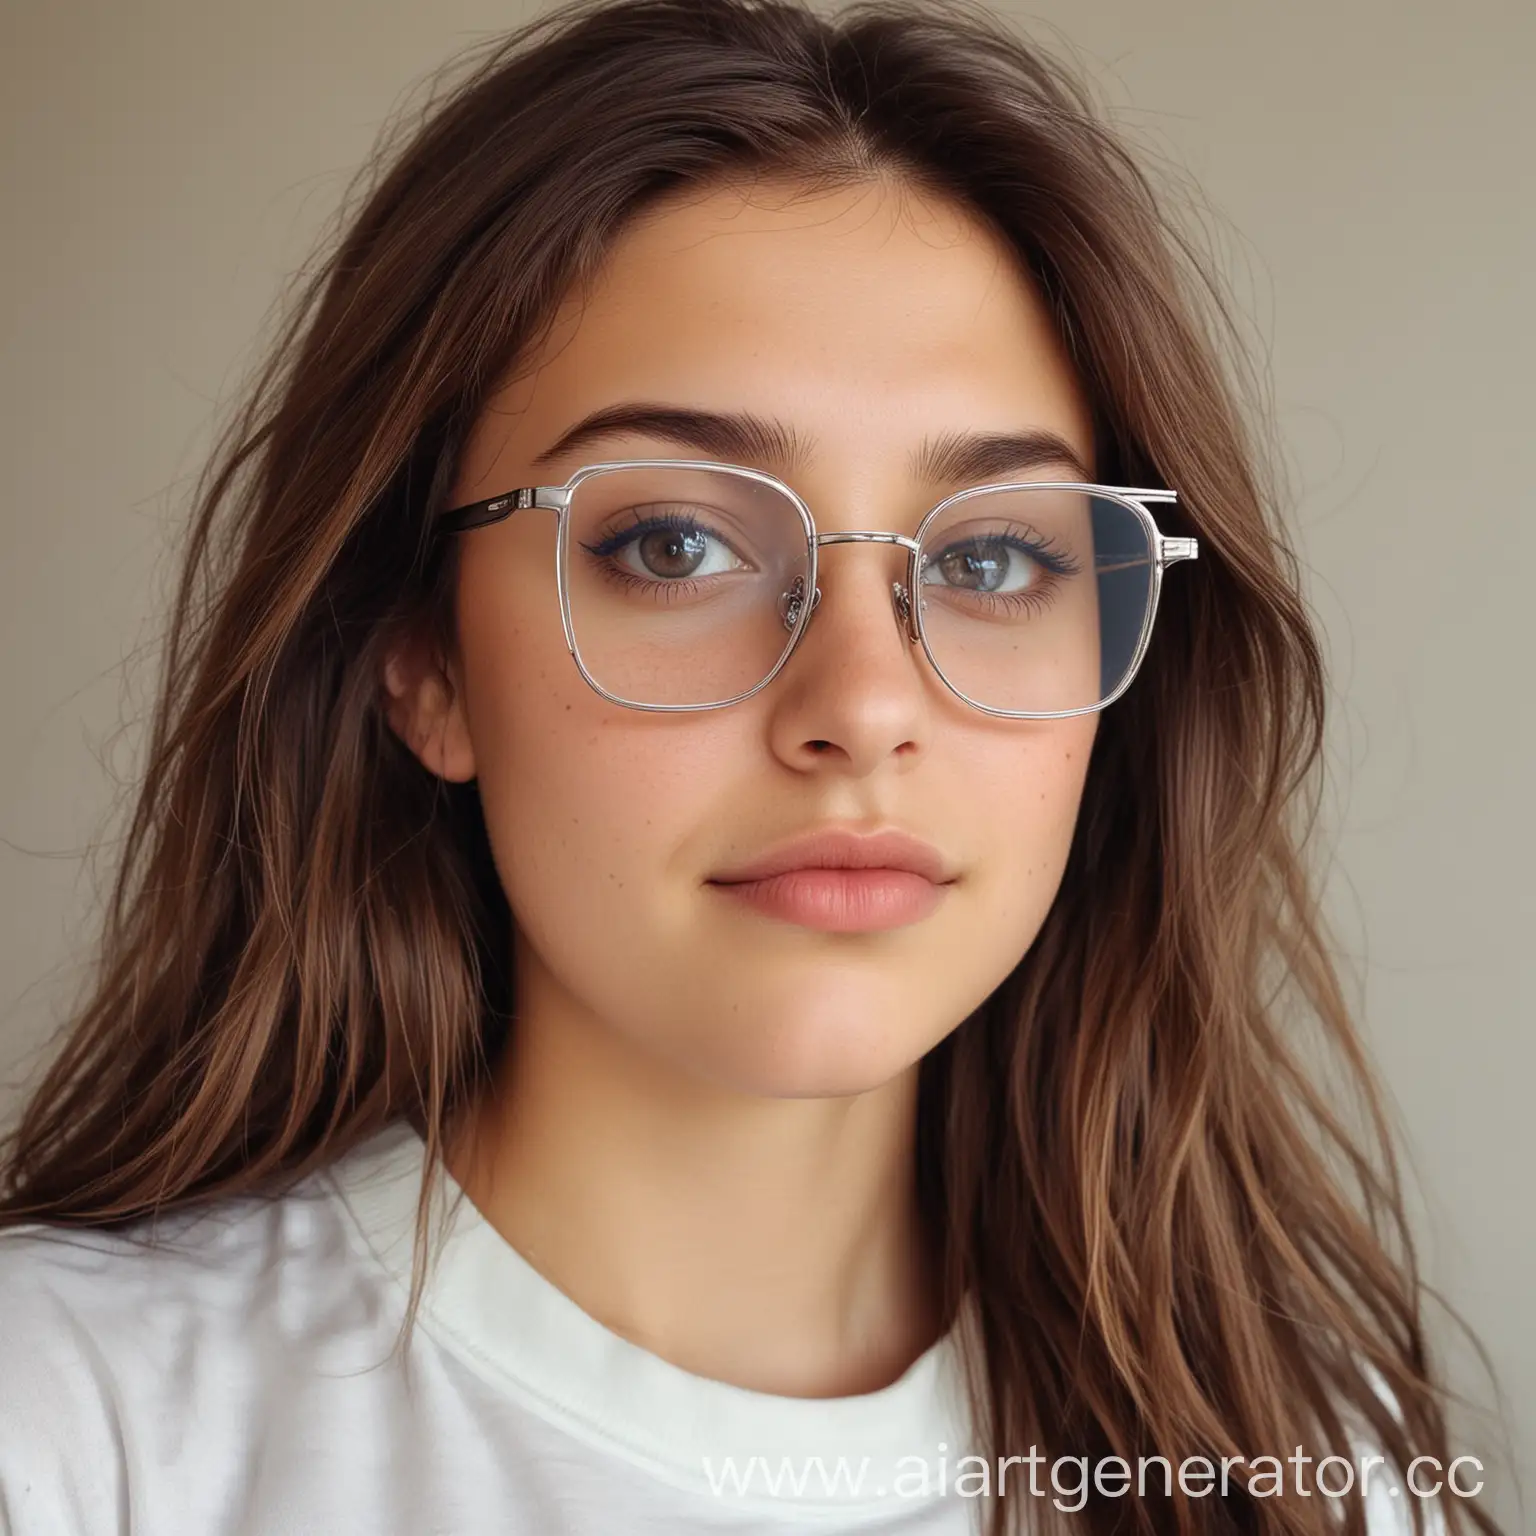 white girl, brown hair down to the waist, brown eyes, moles on her face, square glasses with silver frames, 17 years